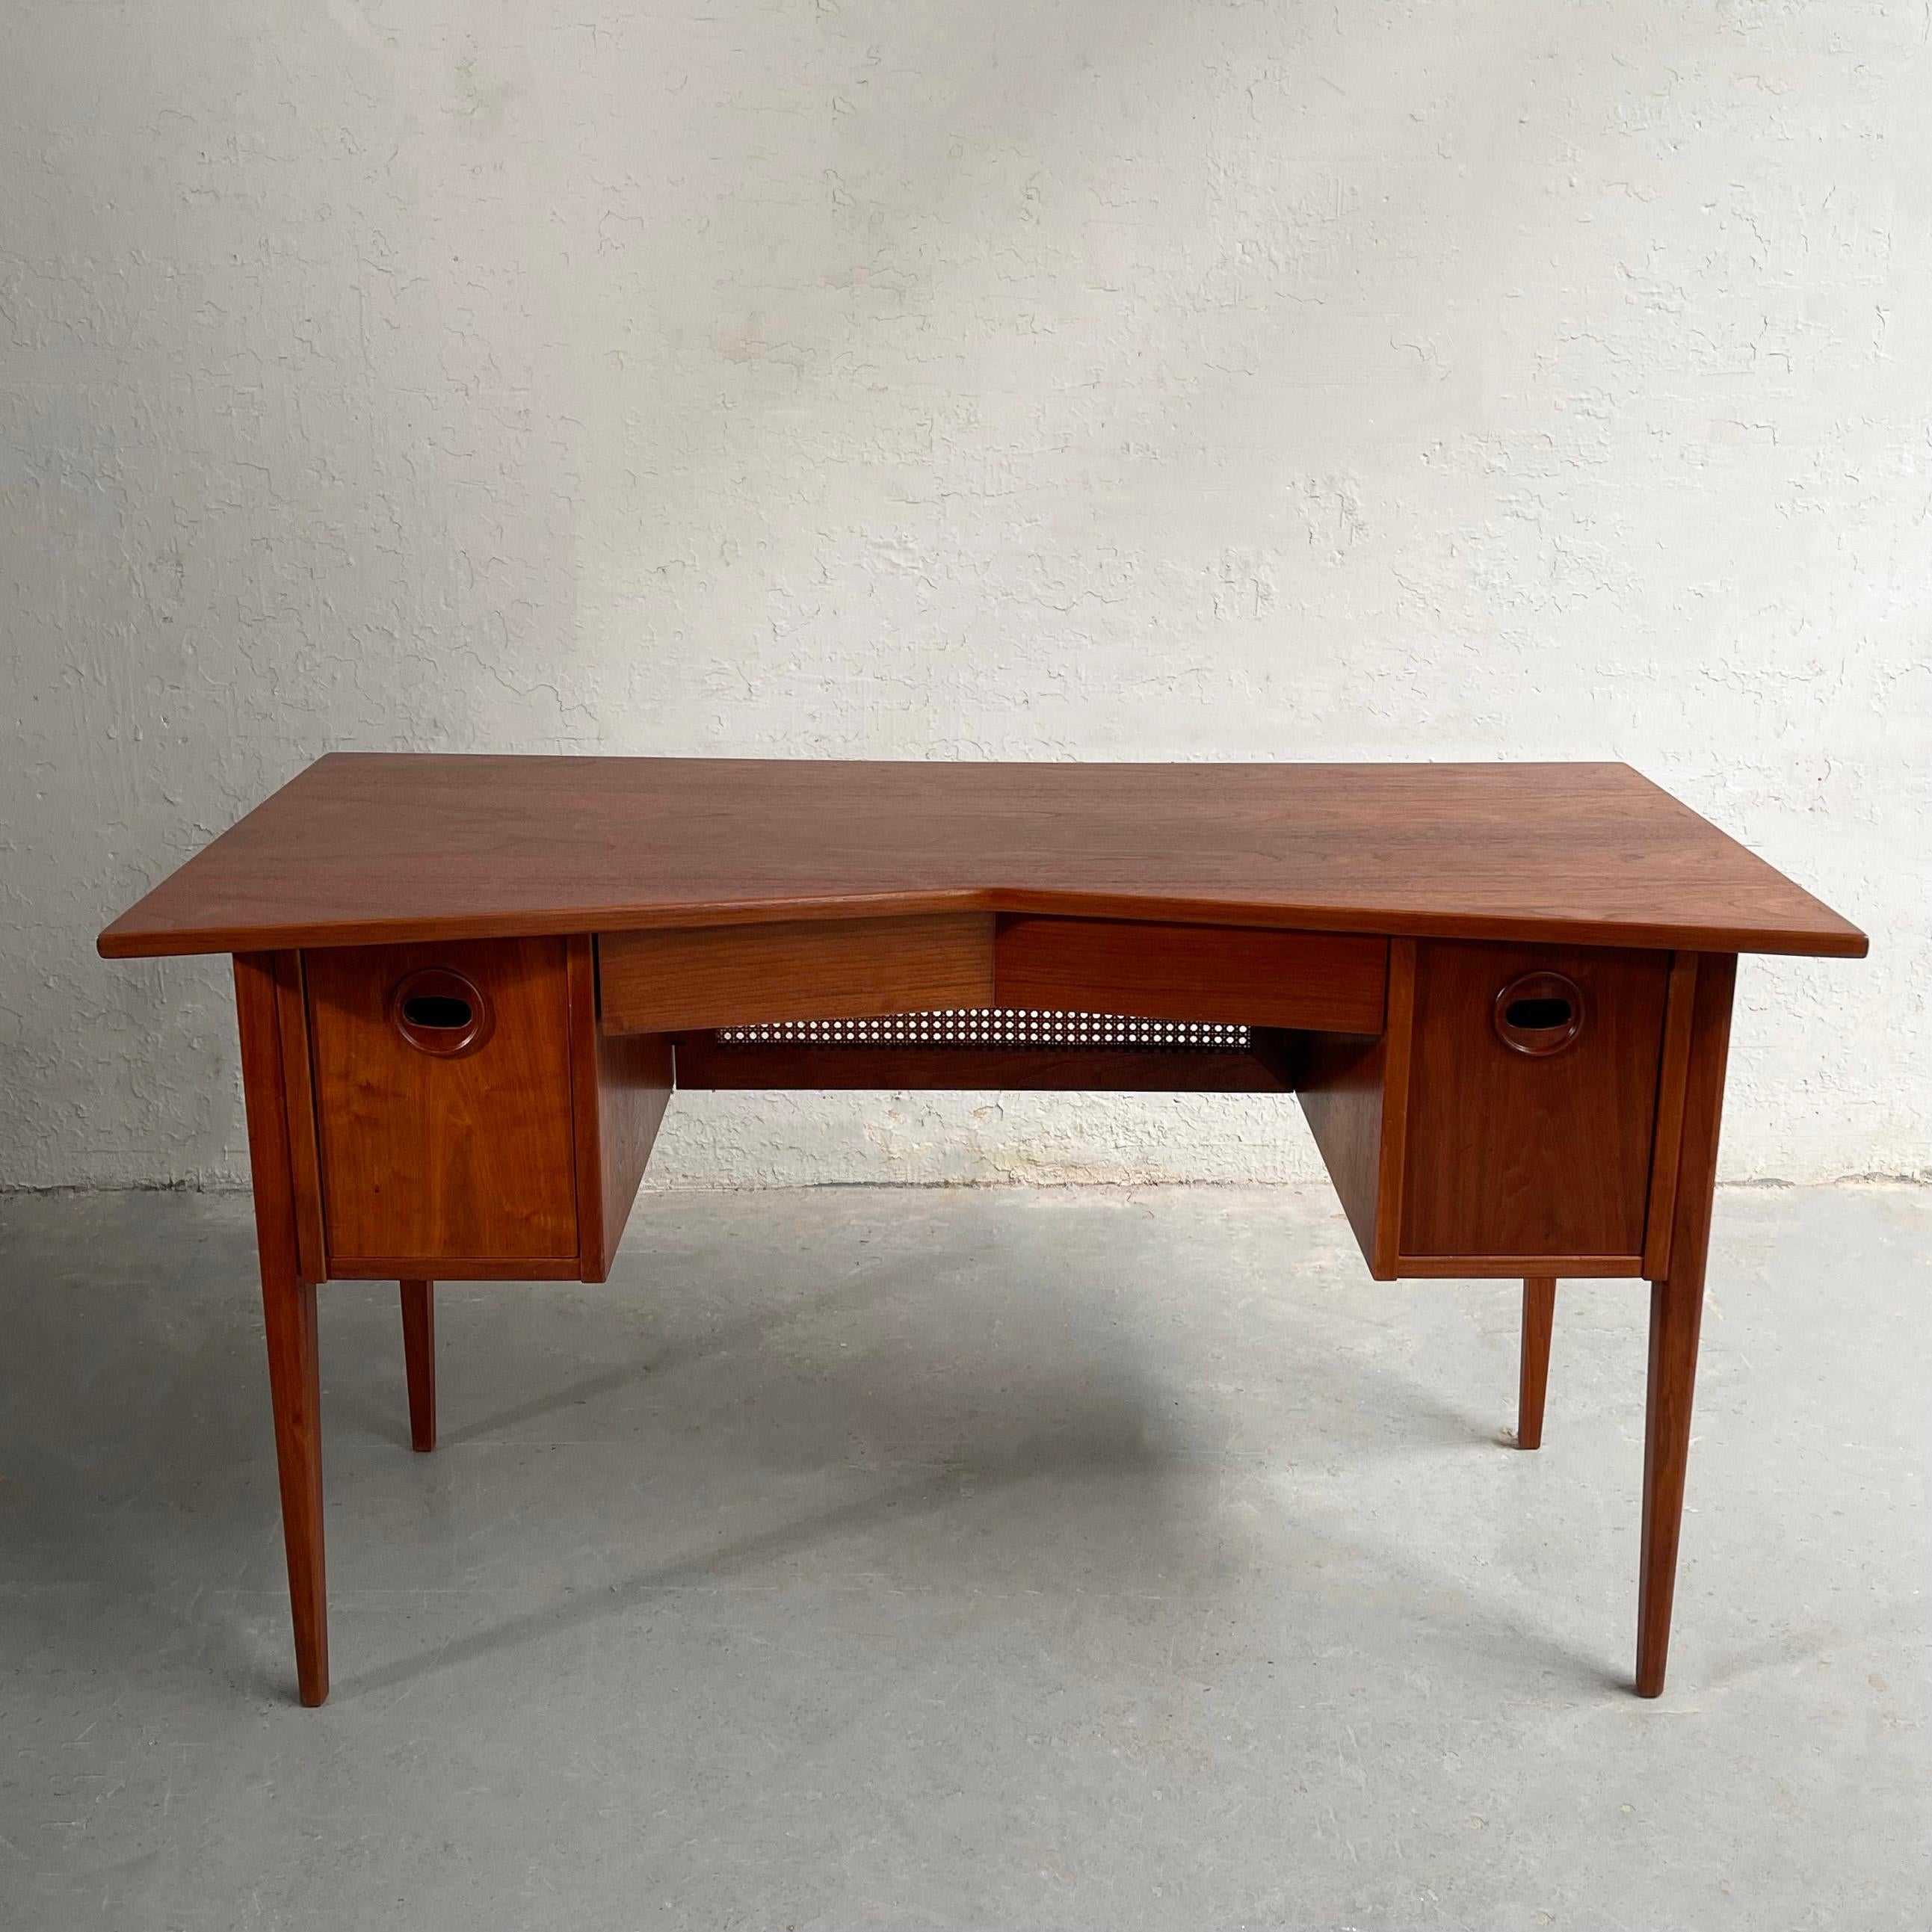 Outstanding, Mid-Century Modern, walnut desk features an angled bowtie top that tapers to 20 inches in the center with recessed drawer pulls and a caned privacy screen in front. The desk is finished on all sides.